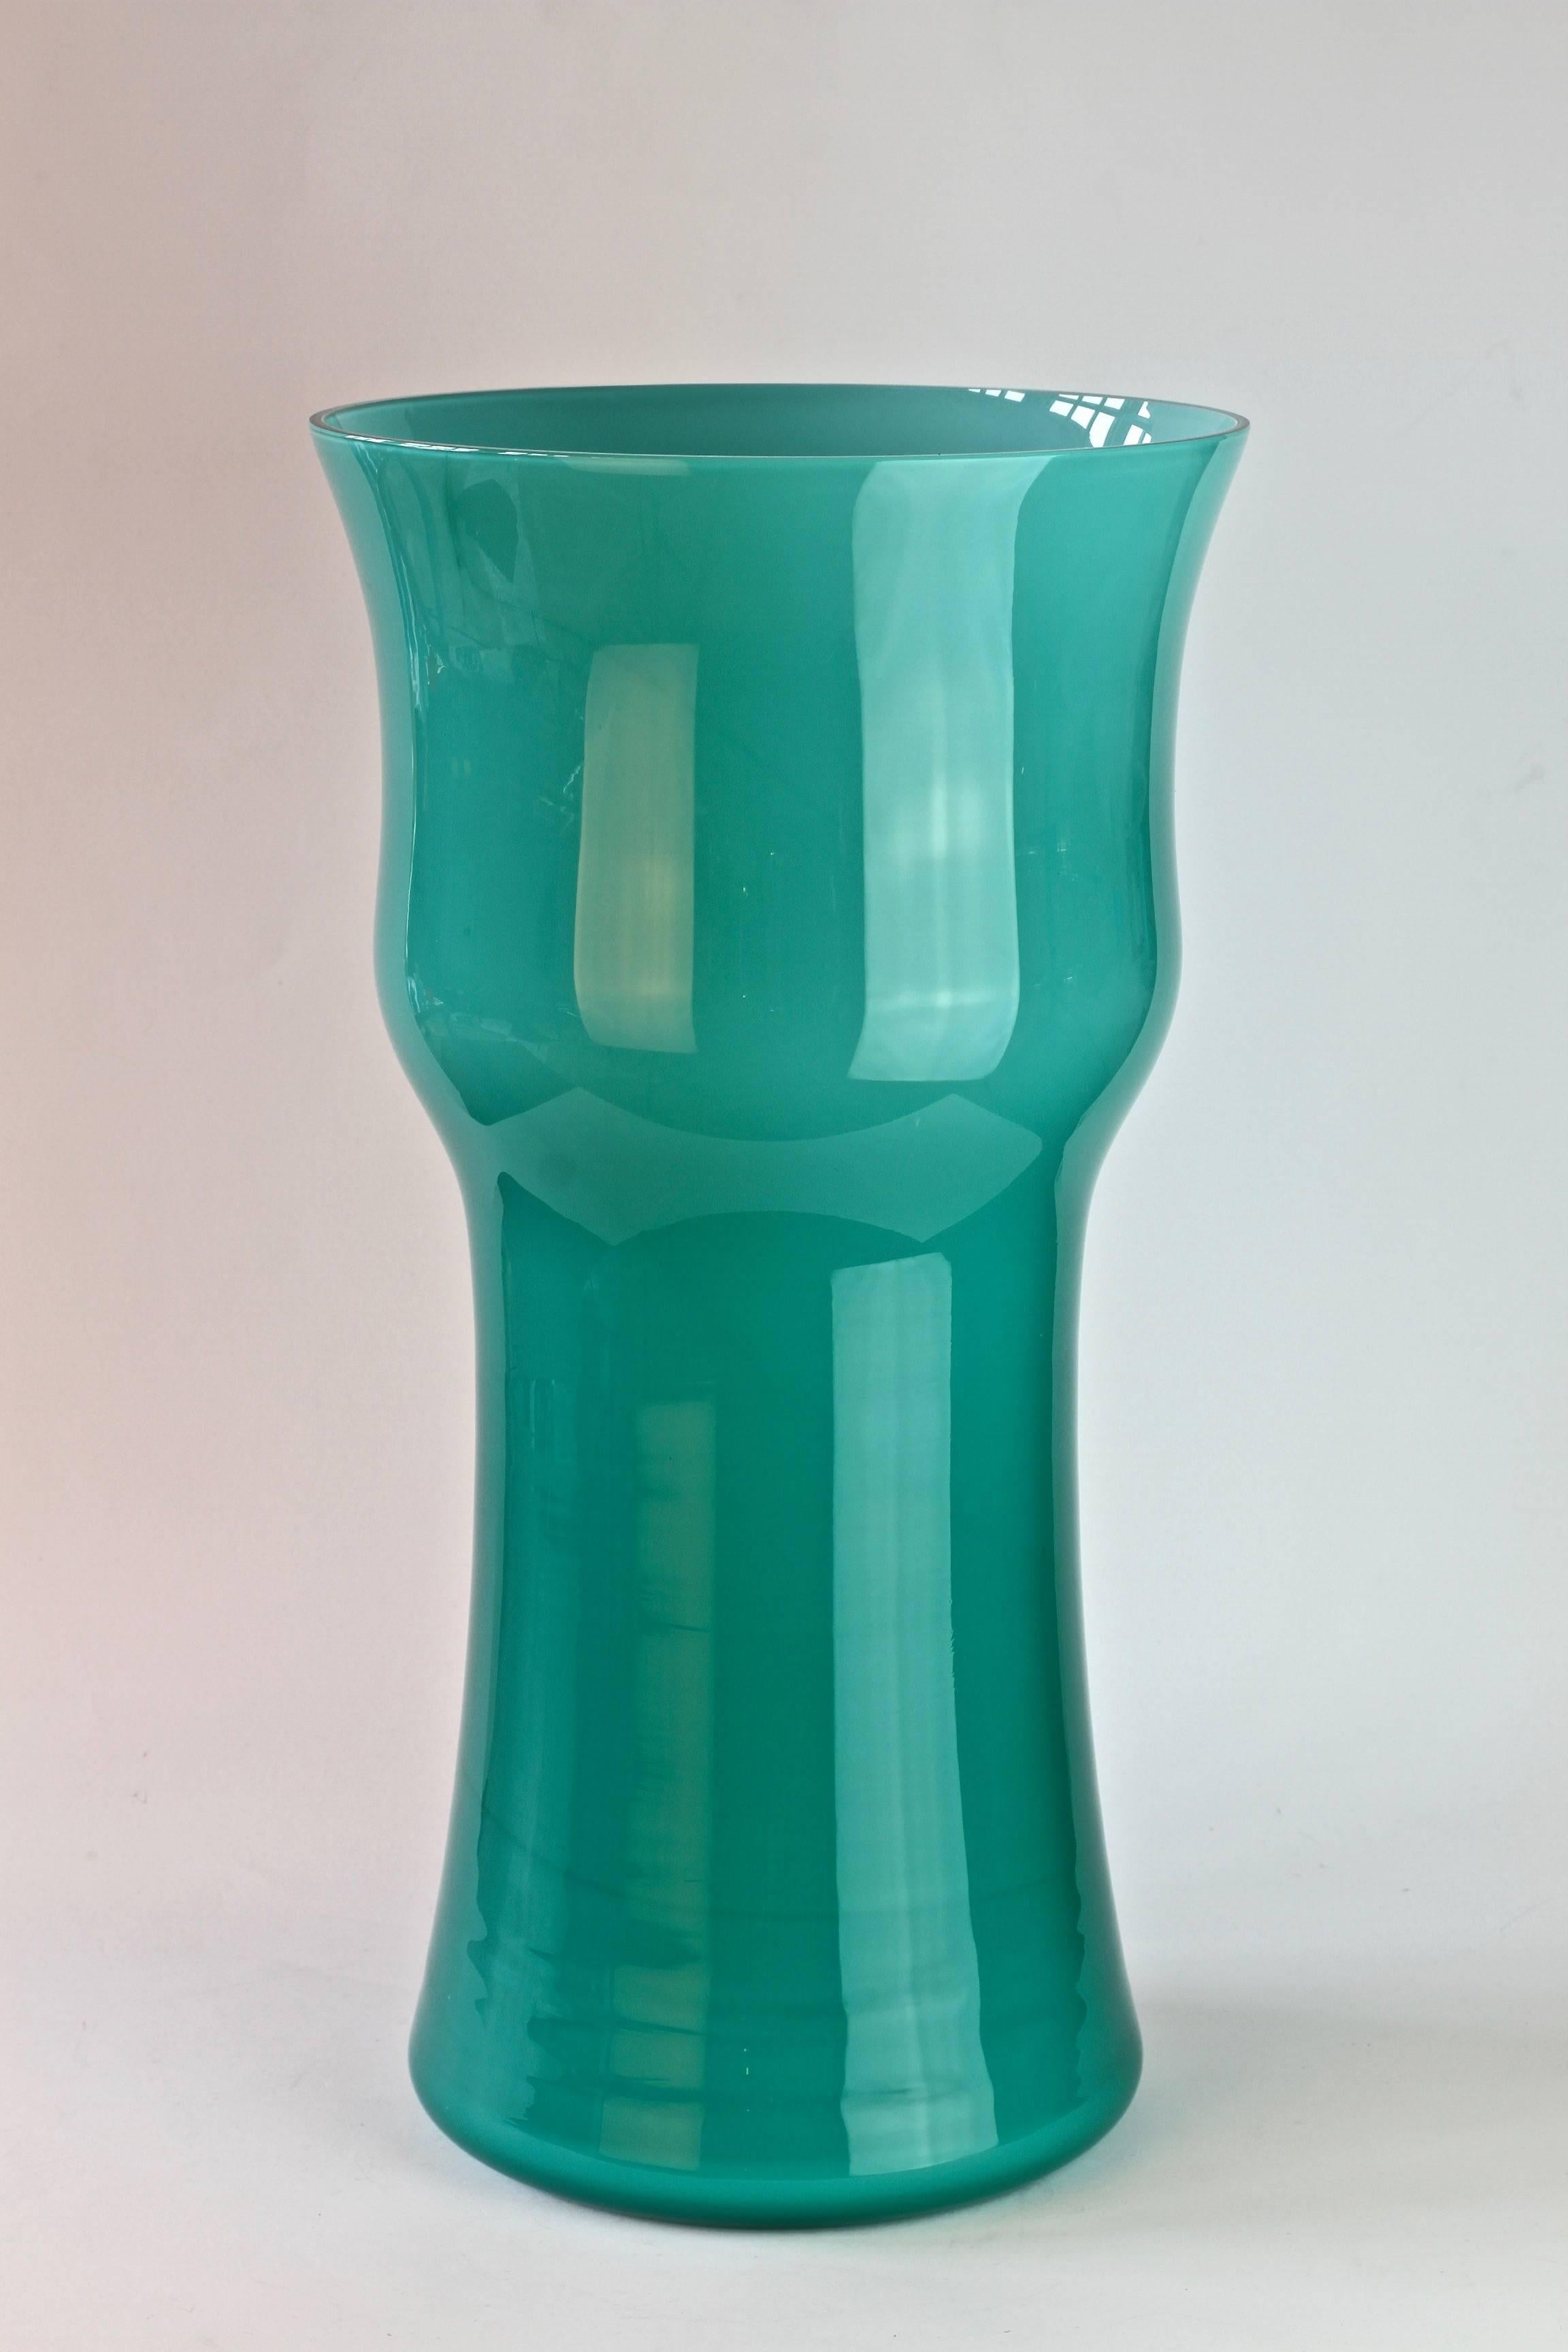 Monumental 18 inch tall centre vase by Cenedese Vetri of Murano, Italy. Particularly striking is it's elegant form and bold, petrol blue/turquoise color.

This is one vessel from a huge collection - available in our 1stdibs store - of Murano glass